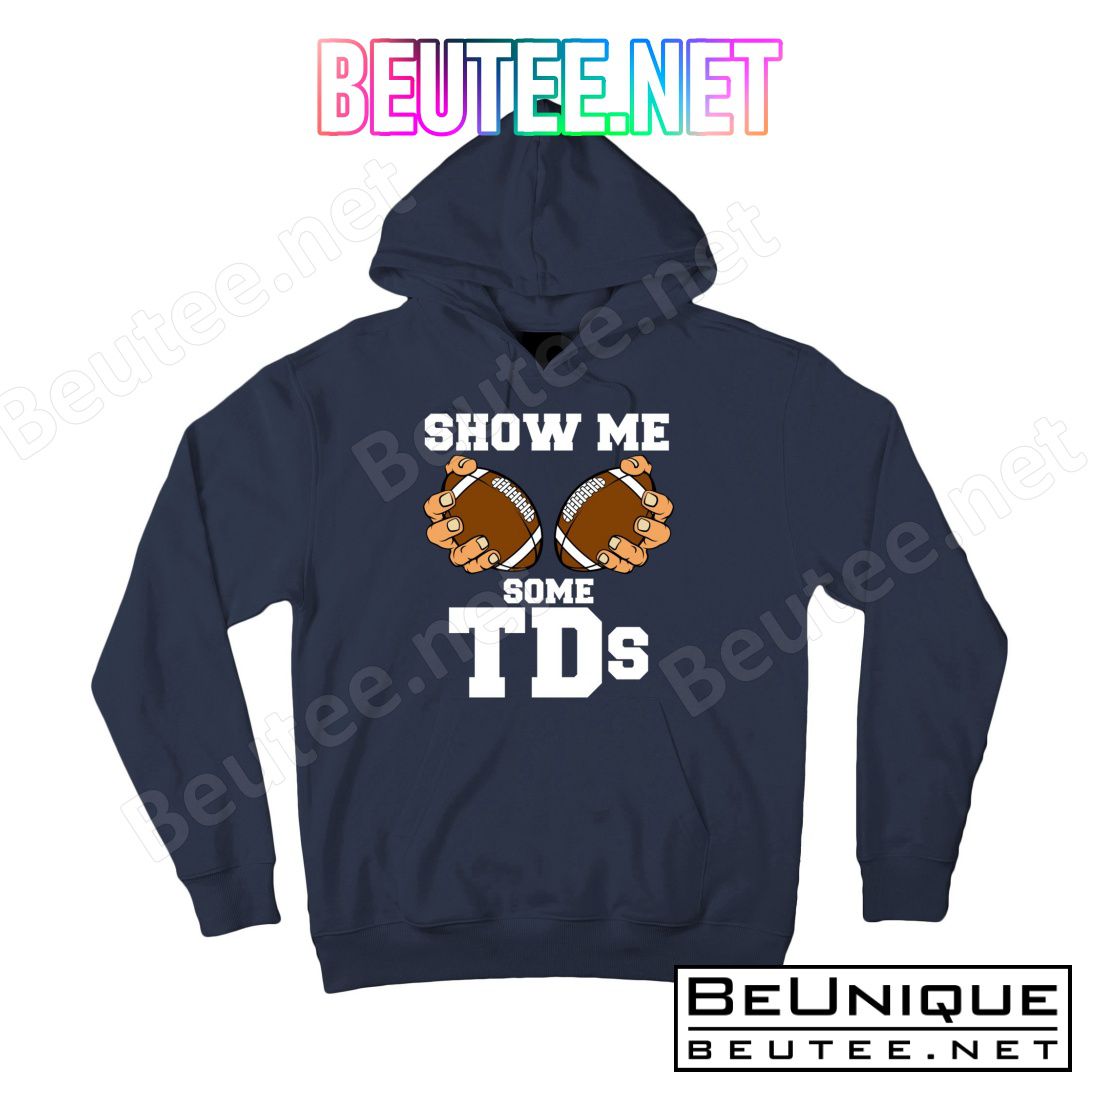 Show Me Some TDs T-Shirts